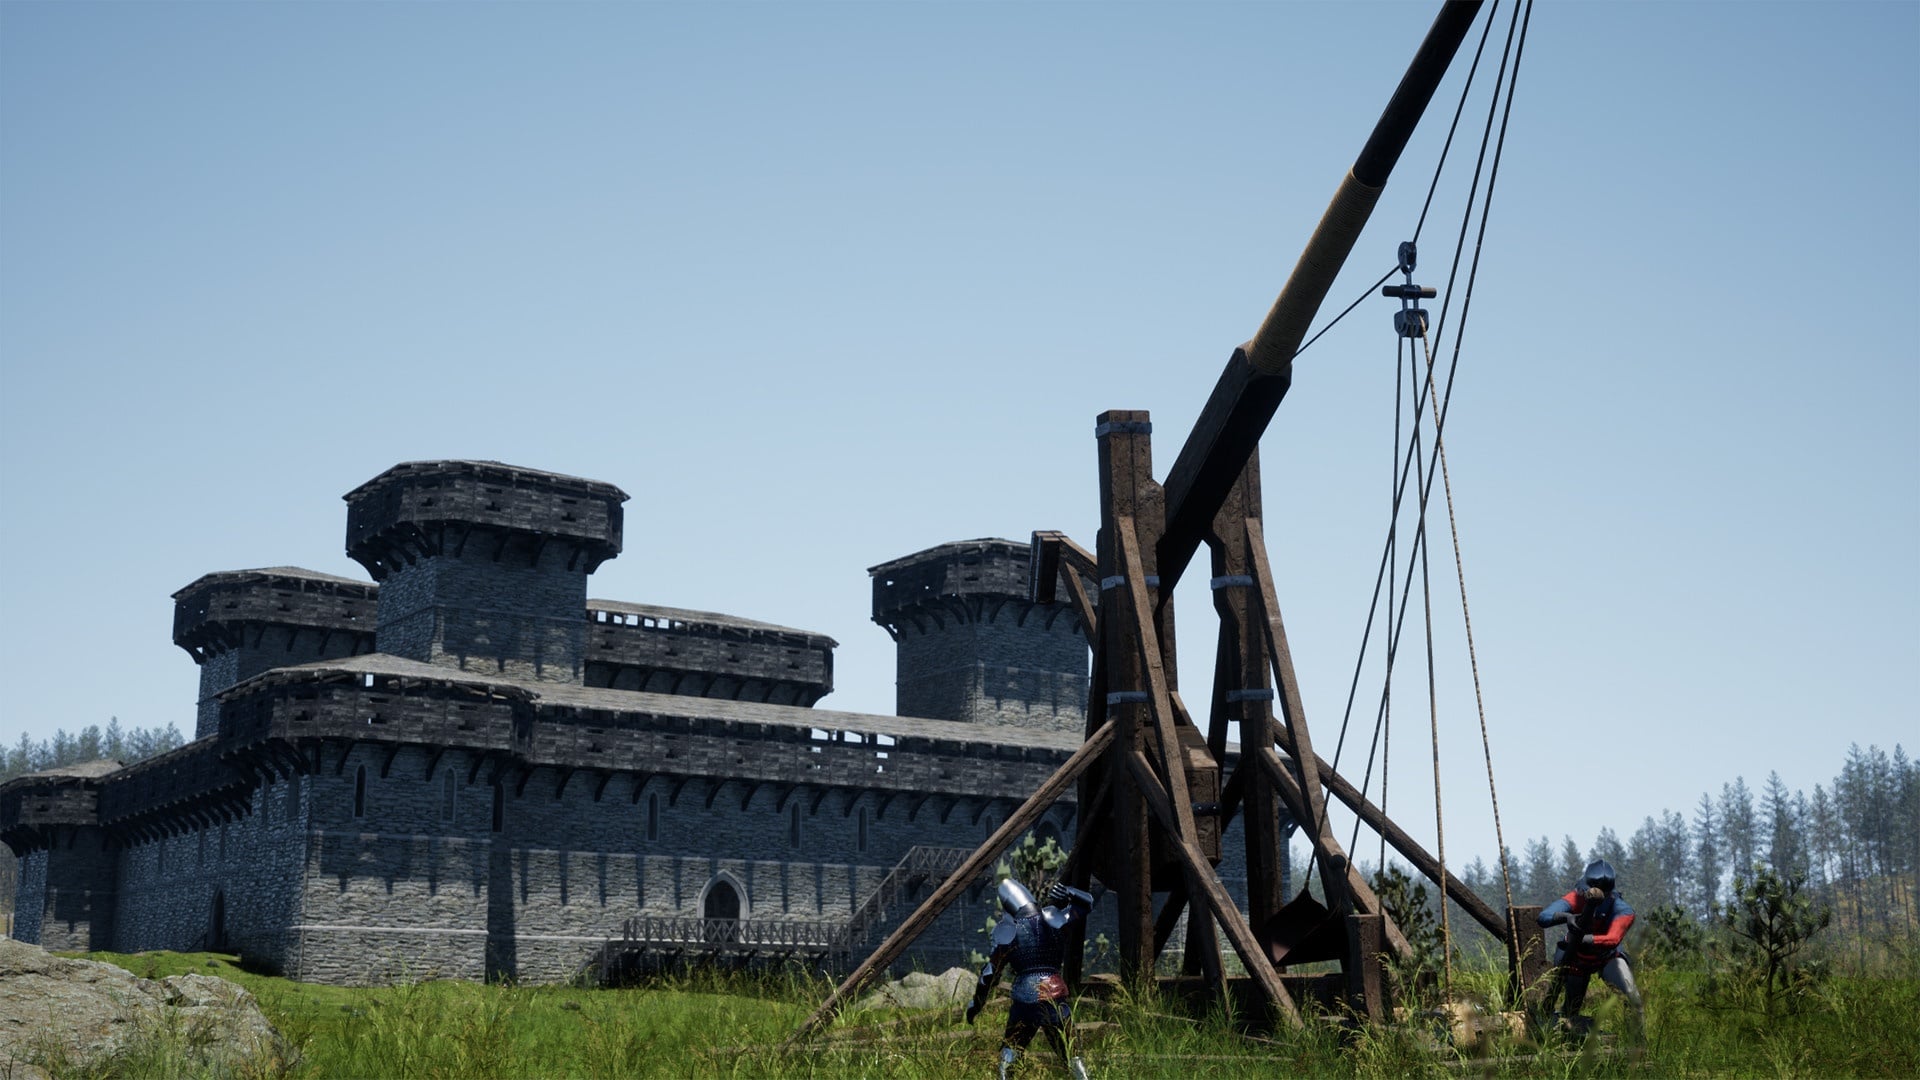 (Siege equipment is also available, the castles are supposed to crumble so dynamically.)